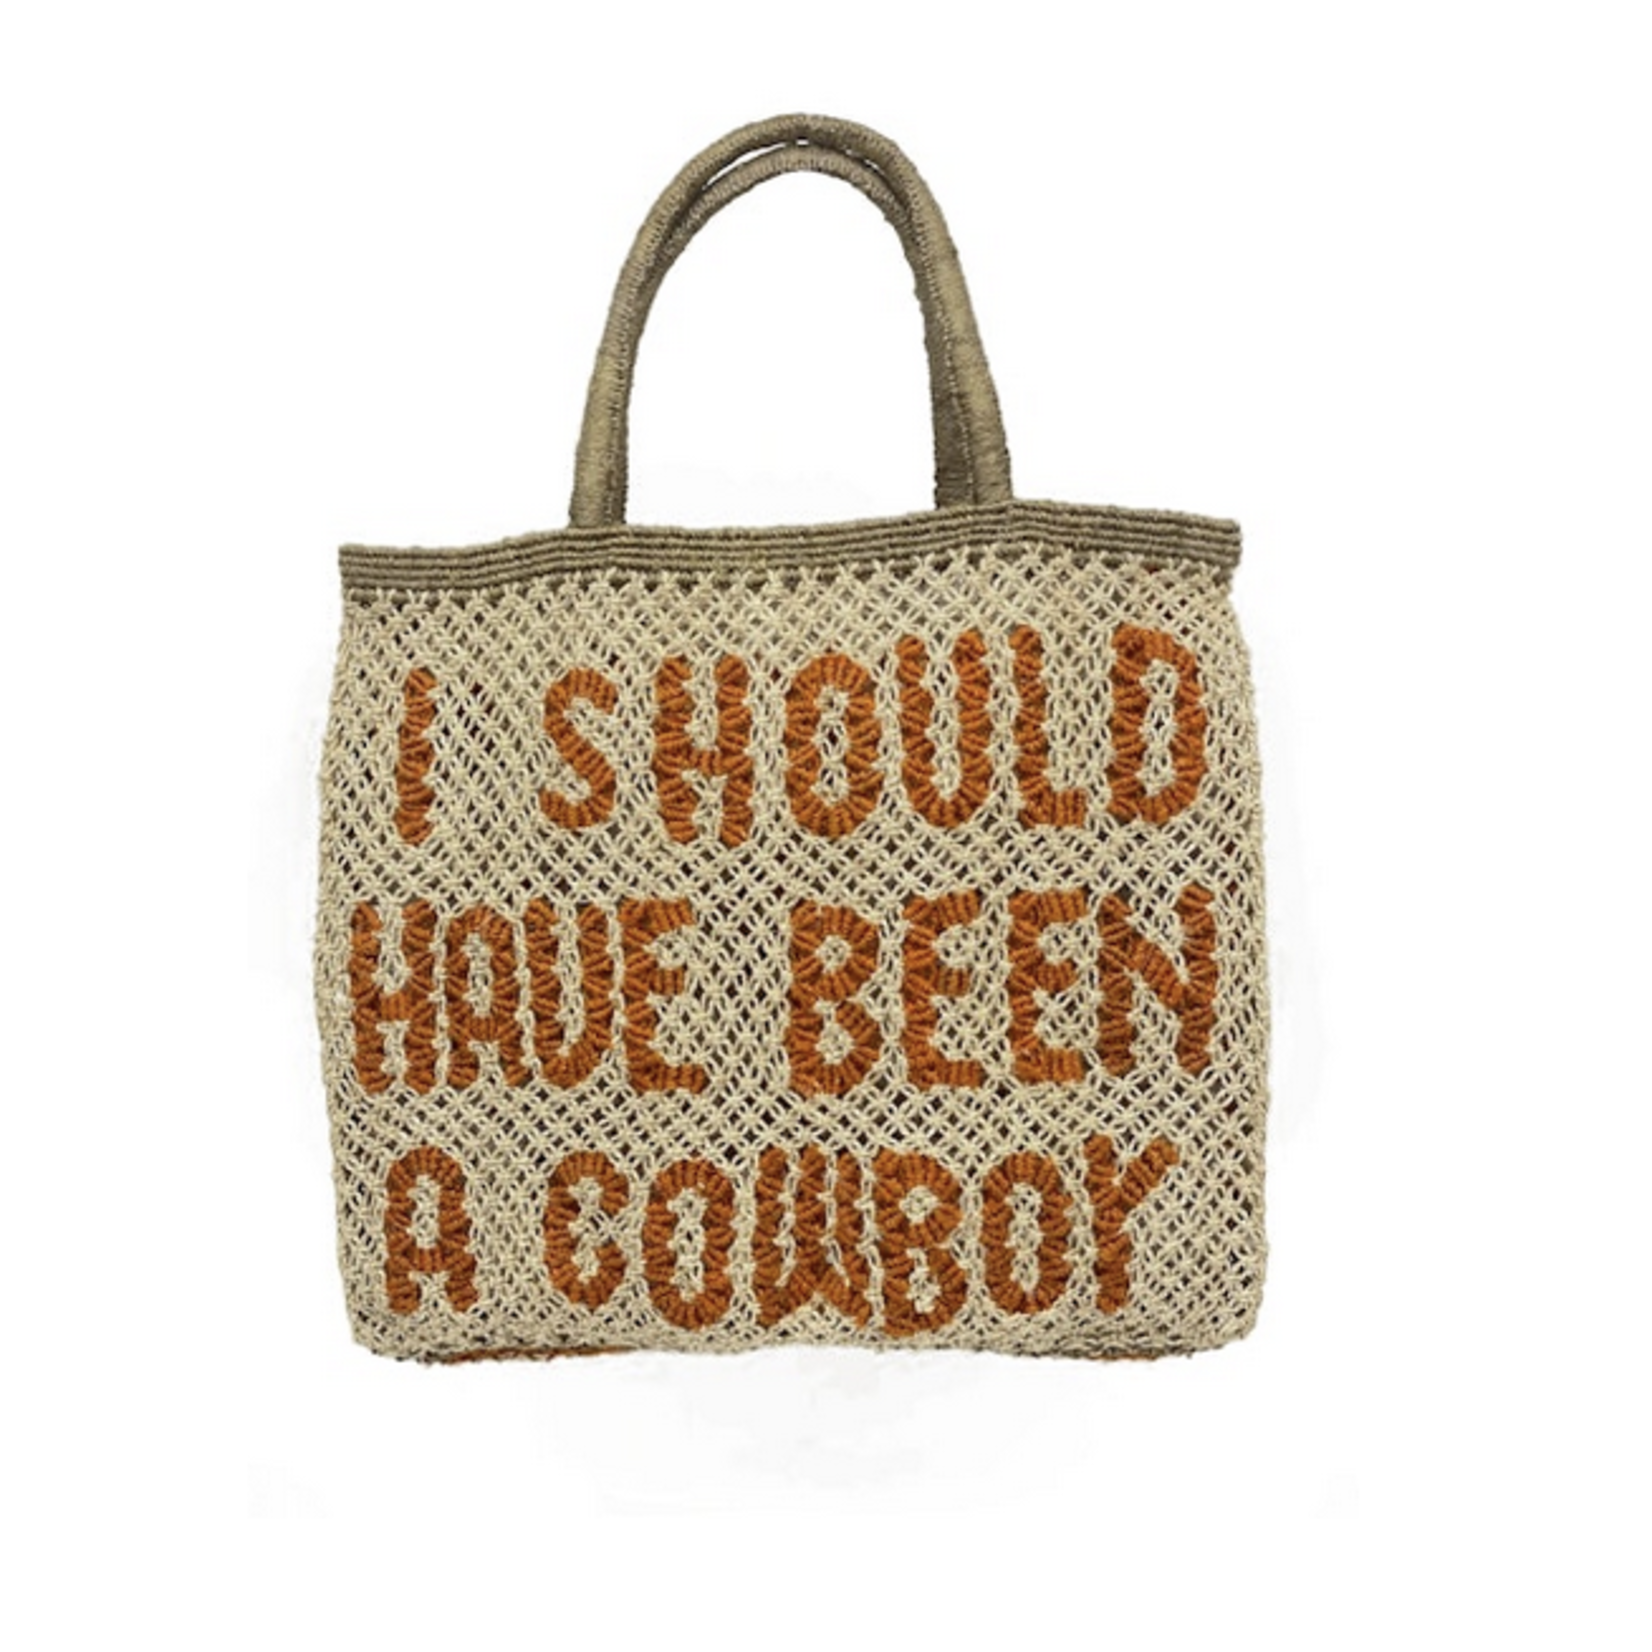 The Jacksons The Jacksons "I Should Have Been A Cowboy" Bag